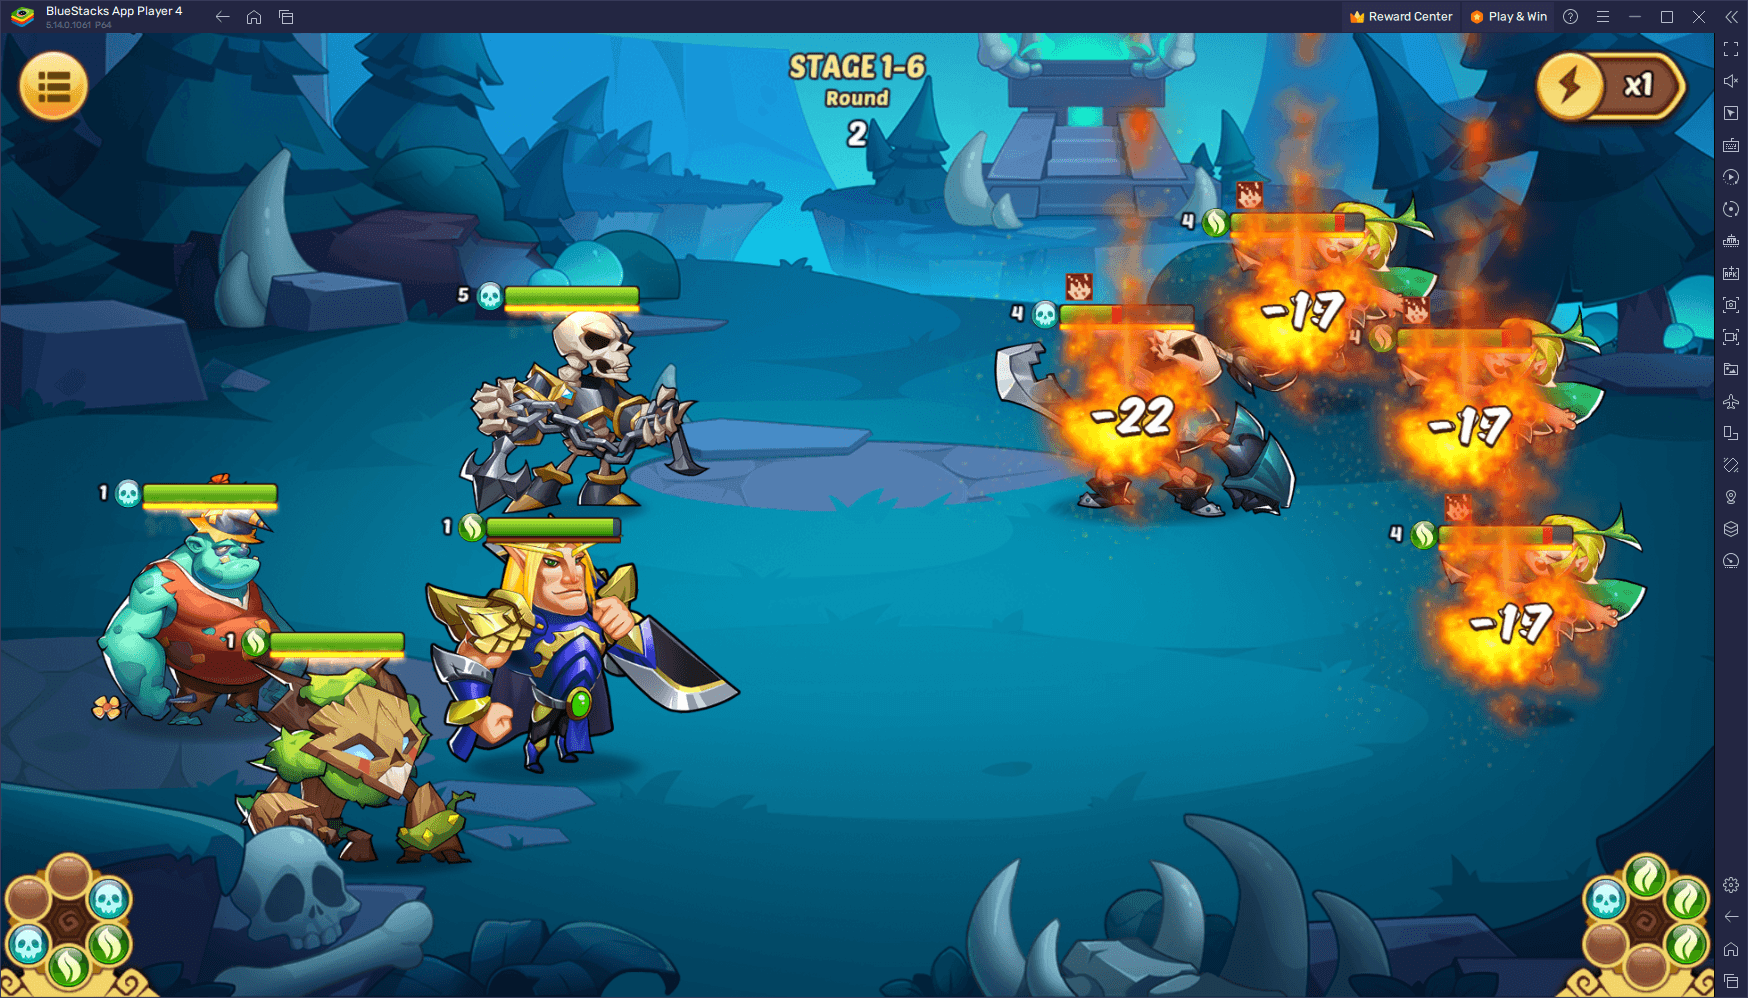 How to Play Idle Heroes on PC With BlueStacks